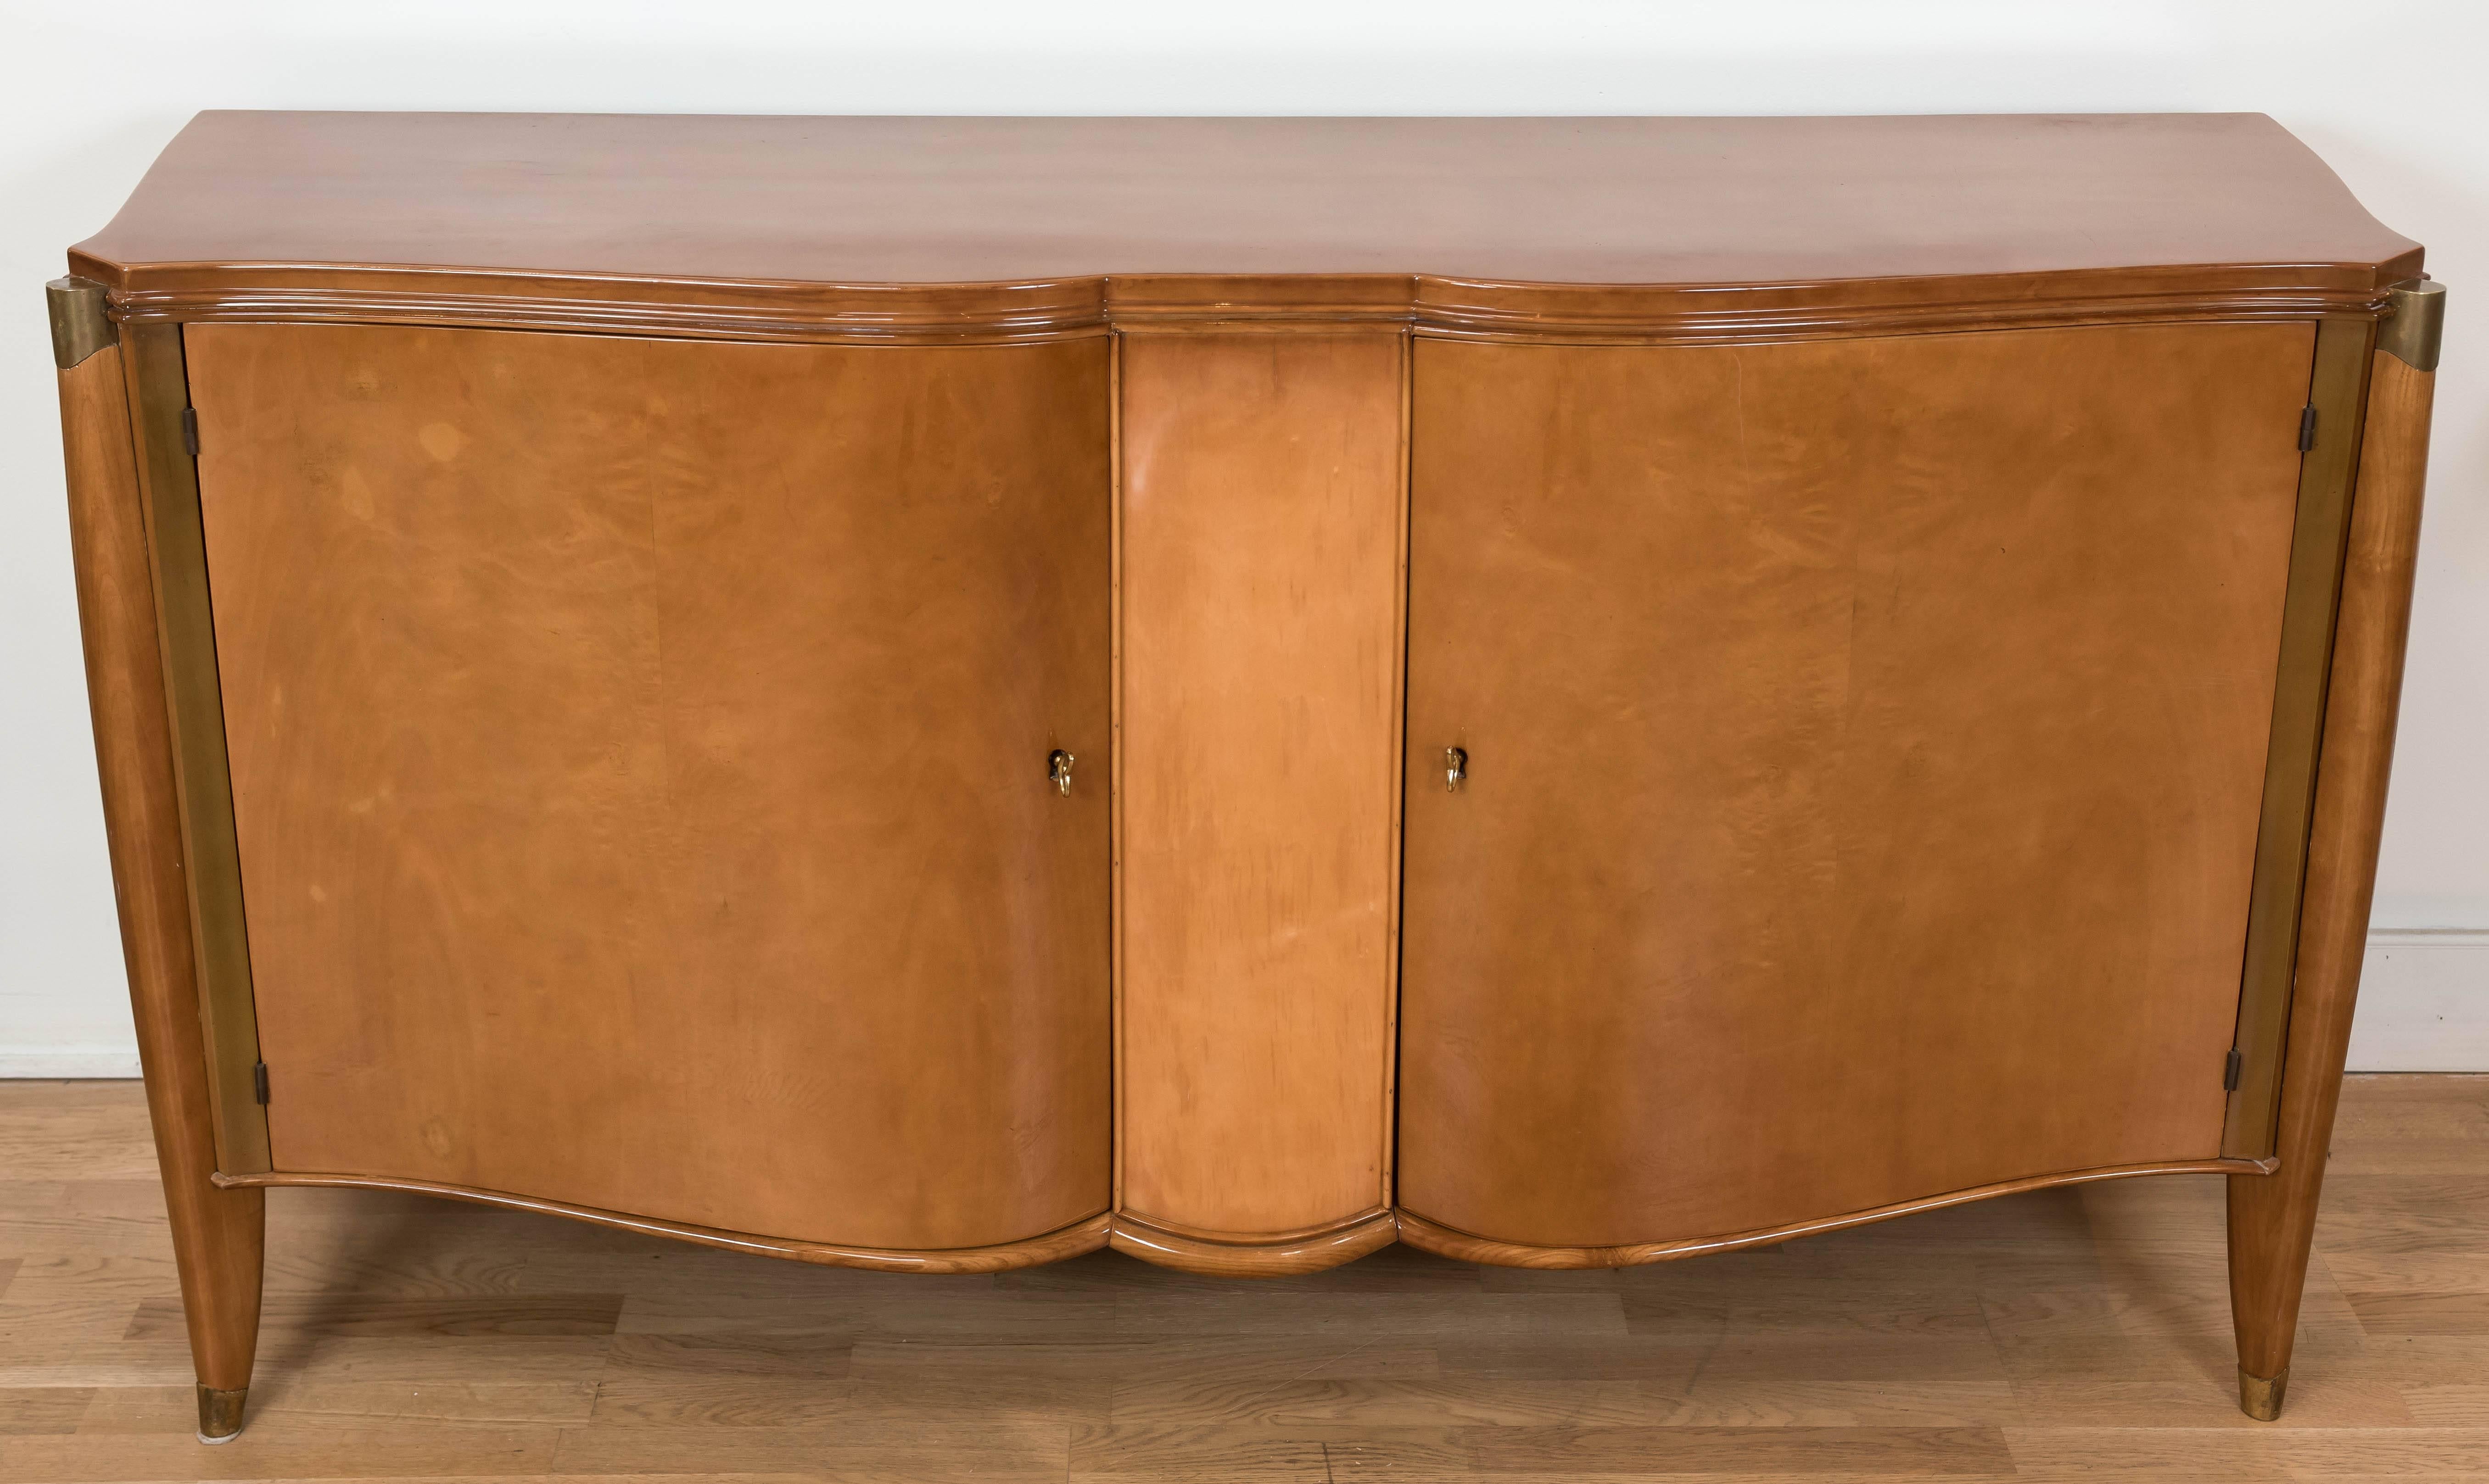 A  decadent and beautifully designed late Deco style serpentine front server with a blond oak interior and a rich maple veneered exterior. It is in its original high gloss lacquer finish and is accented with patinated brass details. The locks are in